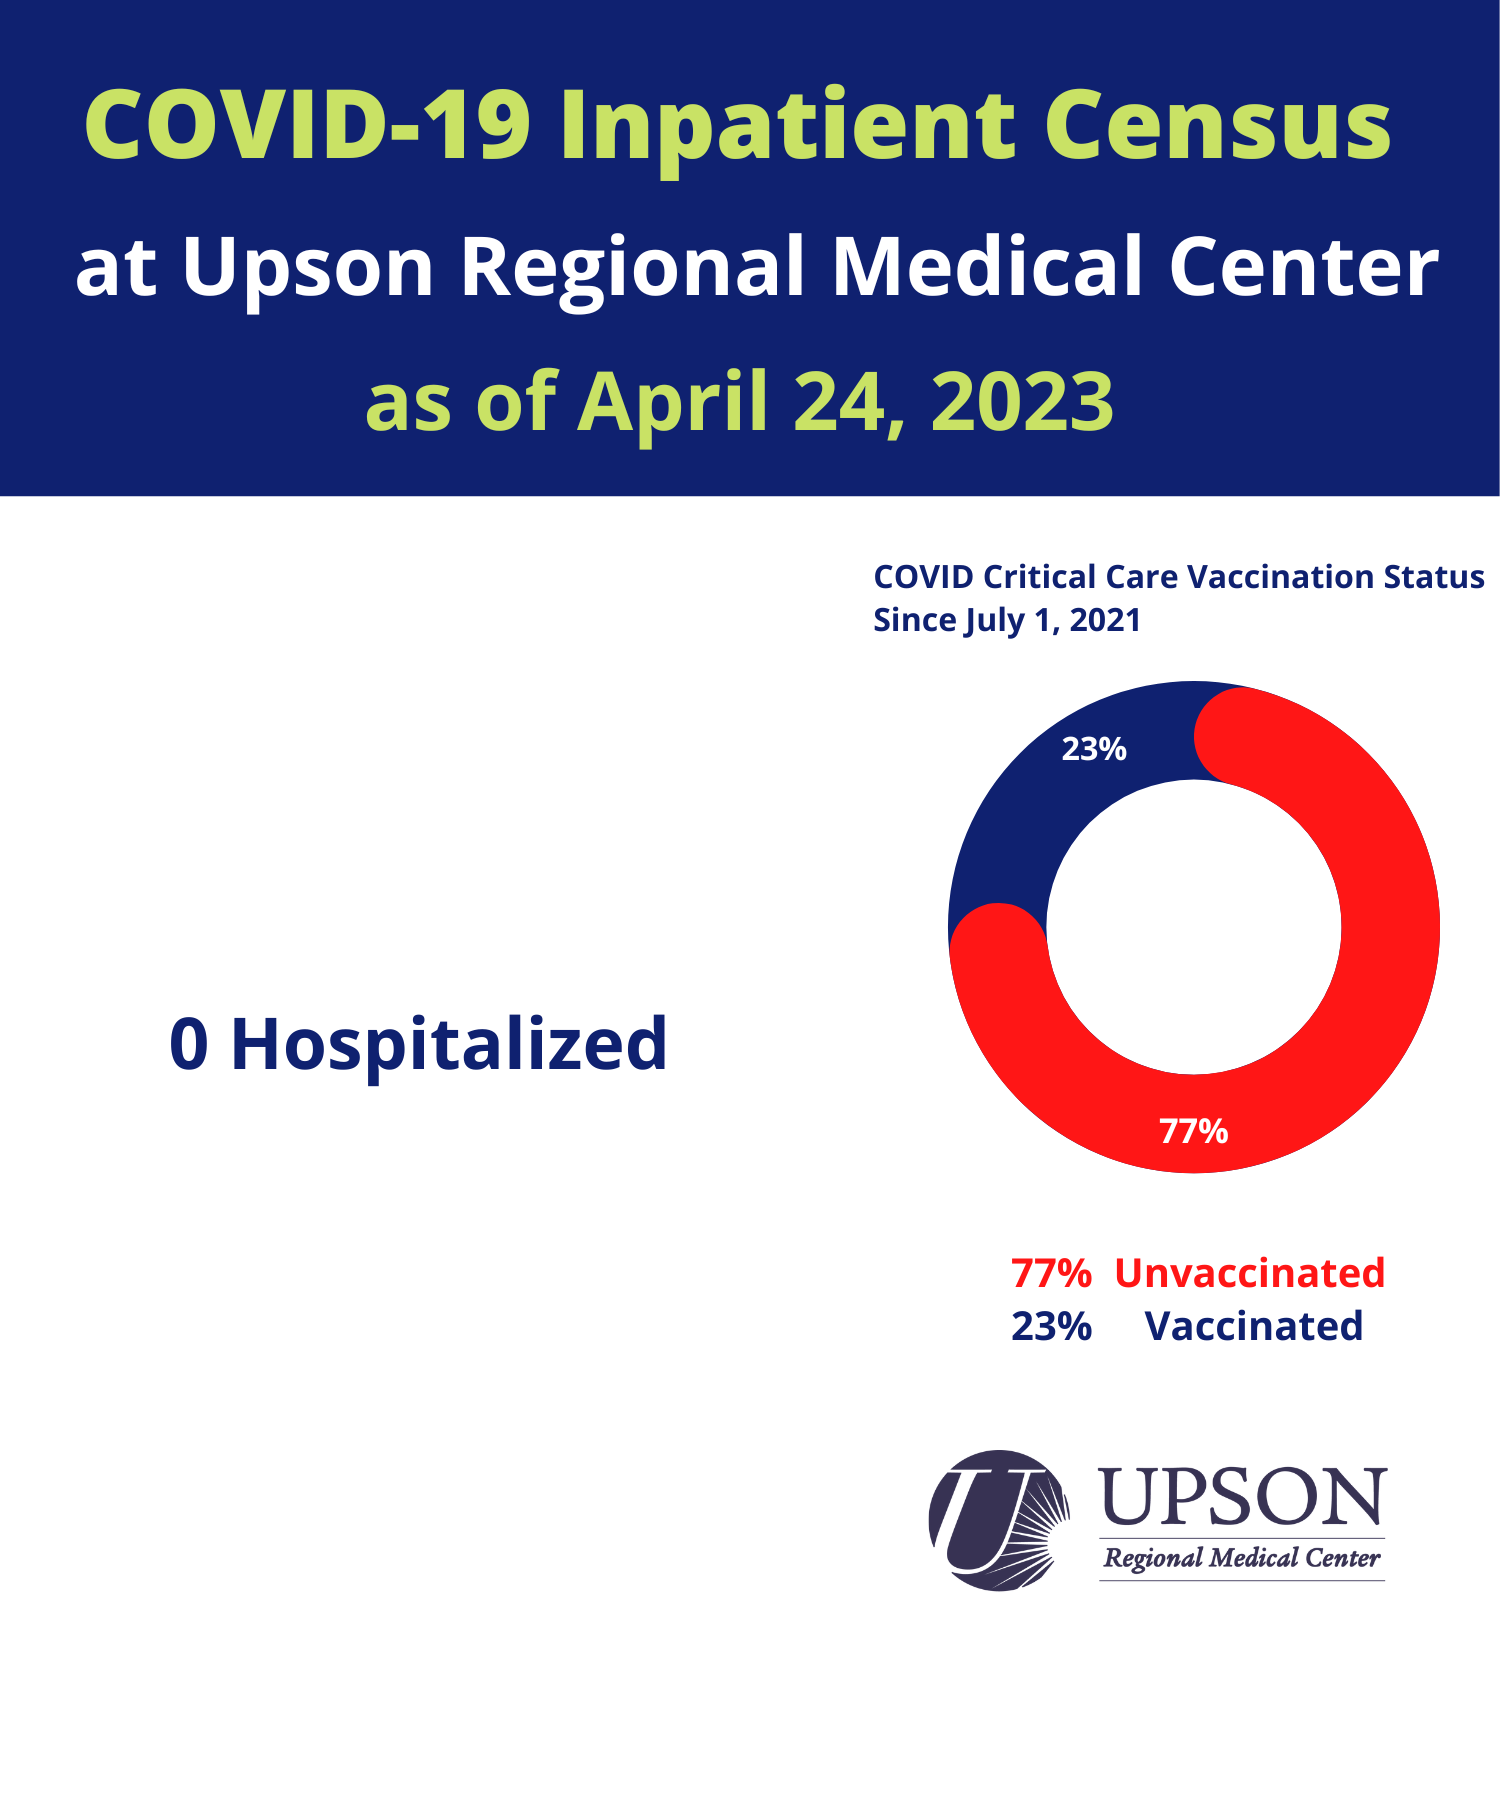 Photo for URMC COVID-19 inpatient status as of April 24, 2023.